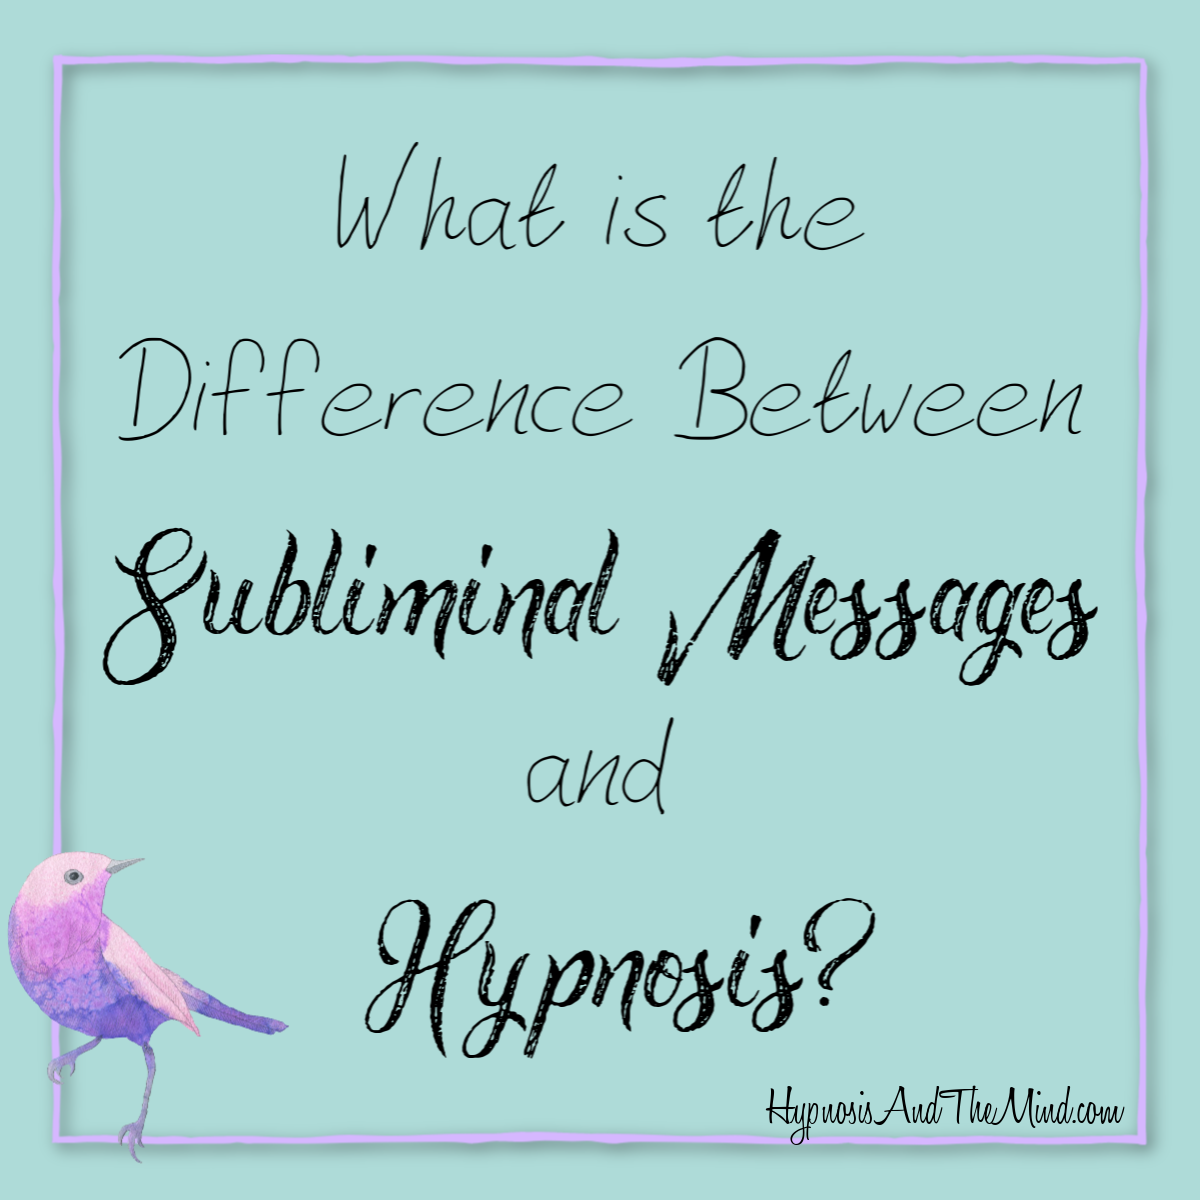 What is the Difference Between Subliminal Messages and Hypnosis